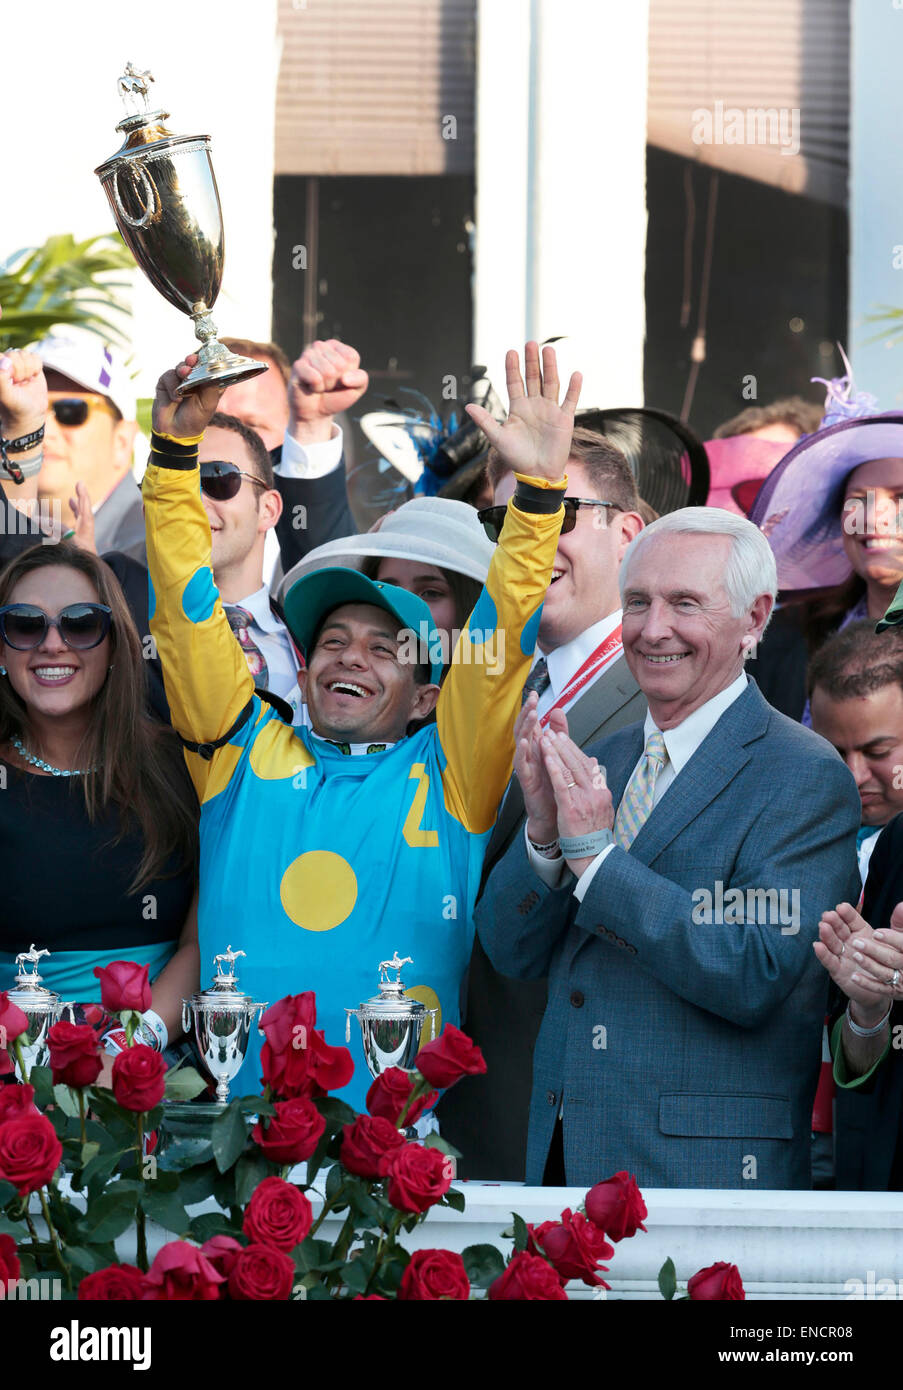 Louisville, KY, USA. 2nd May, 2015. Winning jockey Victor Espinoza, with Ky. Governor Steve Beshear on the right, held up the trophy in the winner's circle after winning the 141st running of the Kentucky Derby aboard American Pharaoh at Churchill Downs in Louisville, Ky., May 2, 2014. The race was won by American Pharoah with Victor Espinoza up. Photo by Charles Bertram | Staff Credit:  Lexington Herald-Leader/ZUMA Wire/Alamy Live News Stock Photo